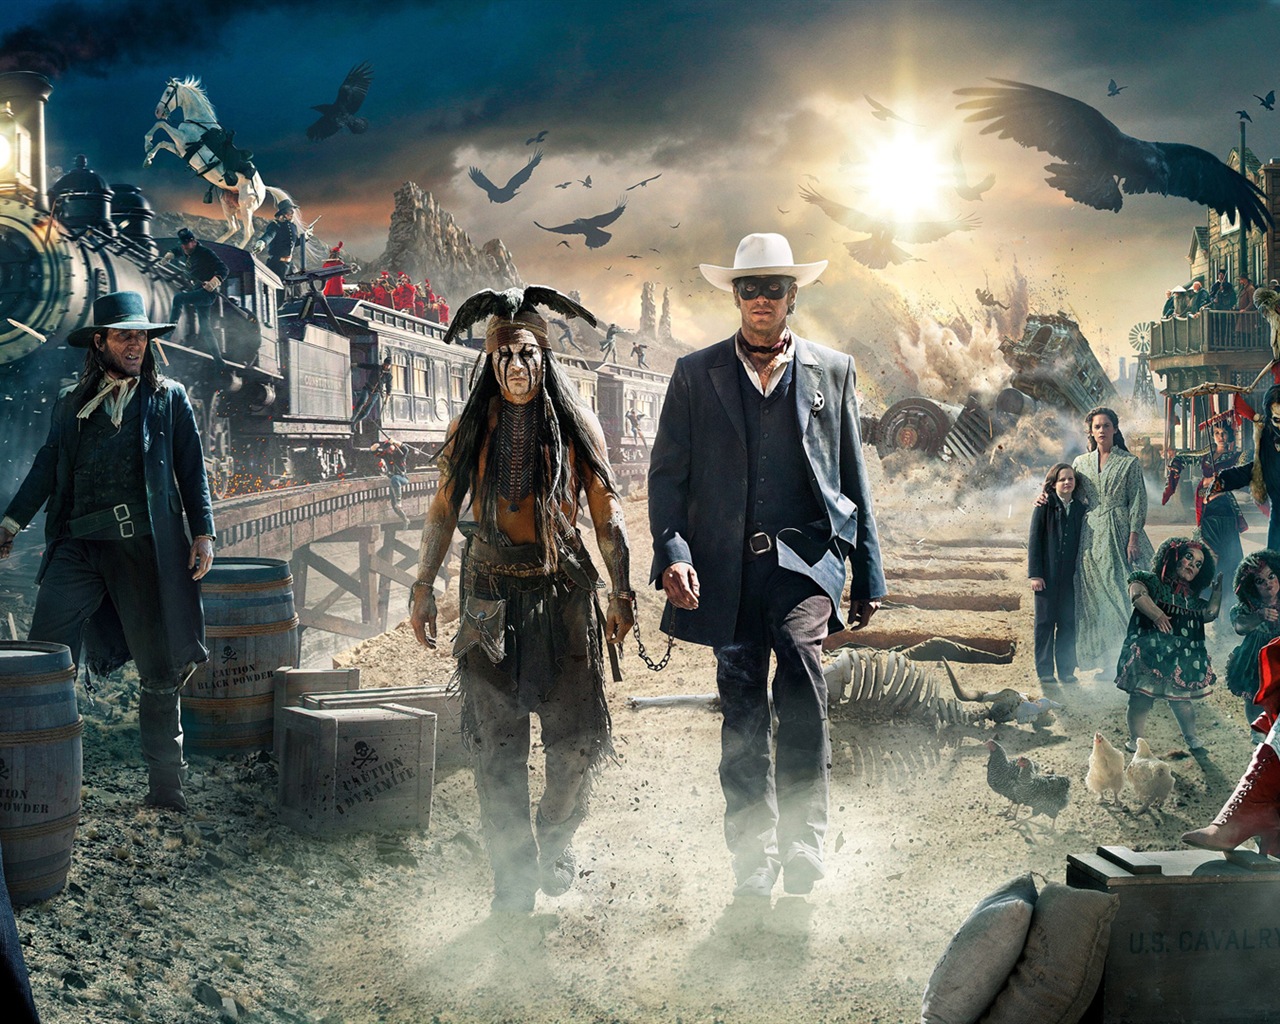 The Lone Ranger HD movie wallpapers #20 - 1280x1024